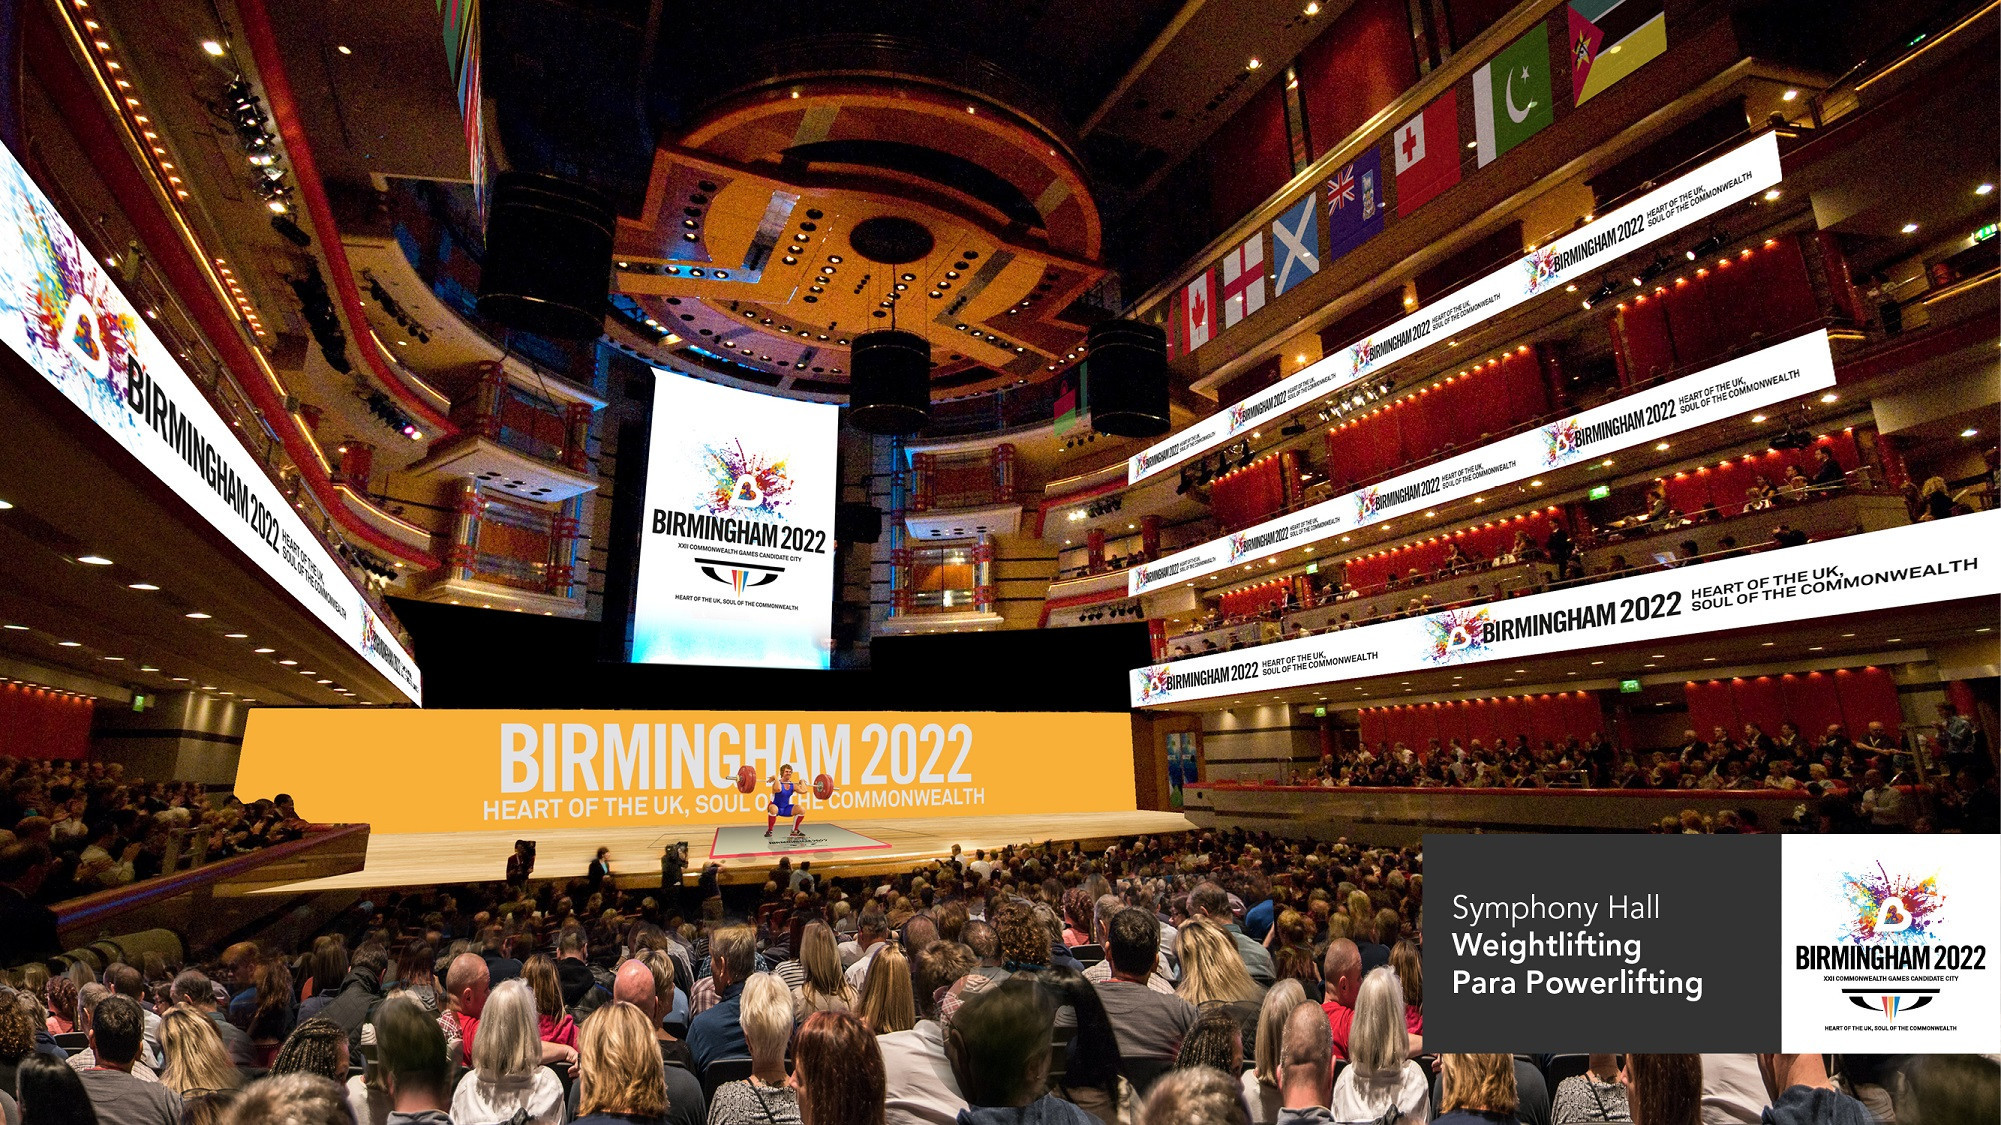 Symphony Hall would be among the venues if Birmingham is awarded the 2022 Commonwealth Games ©Birmingham 2022